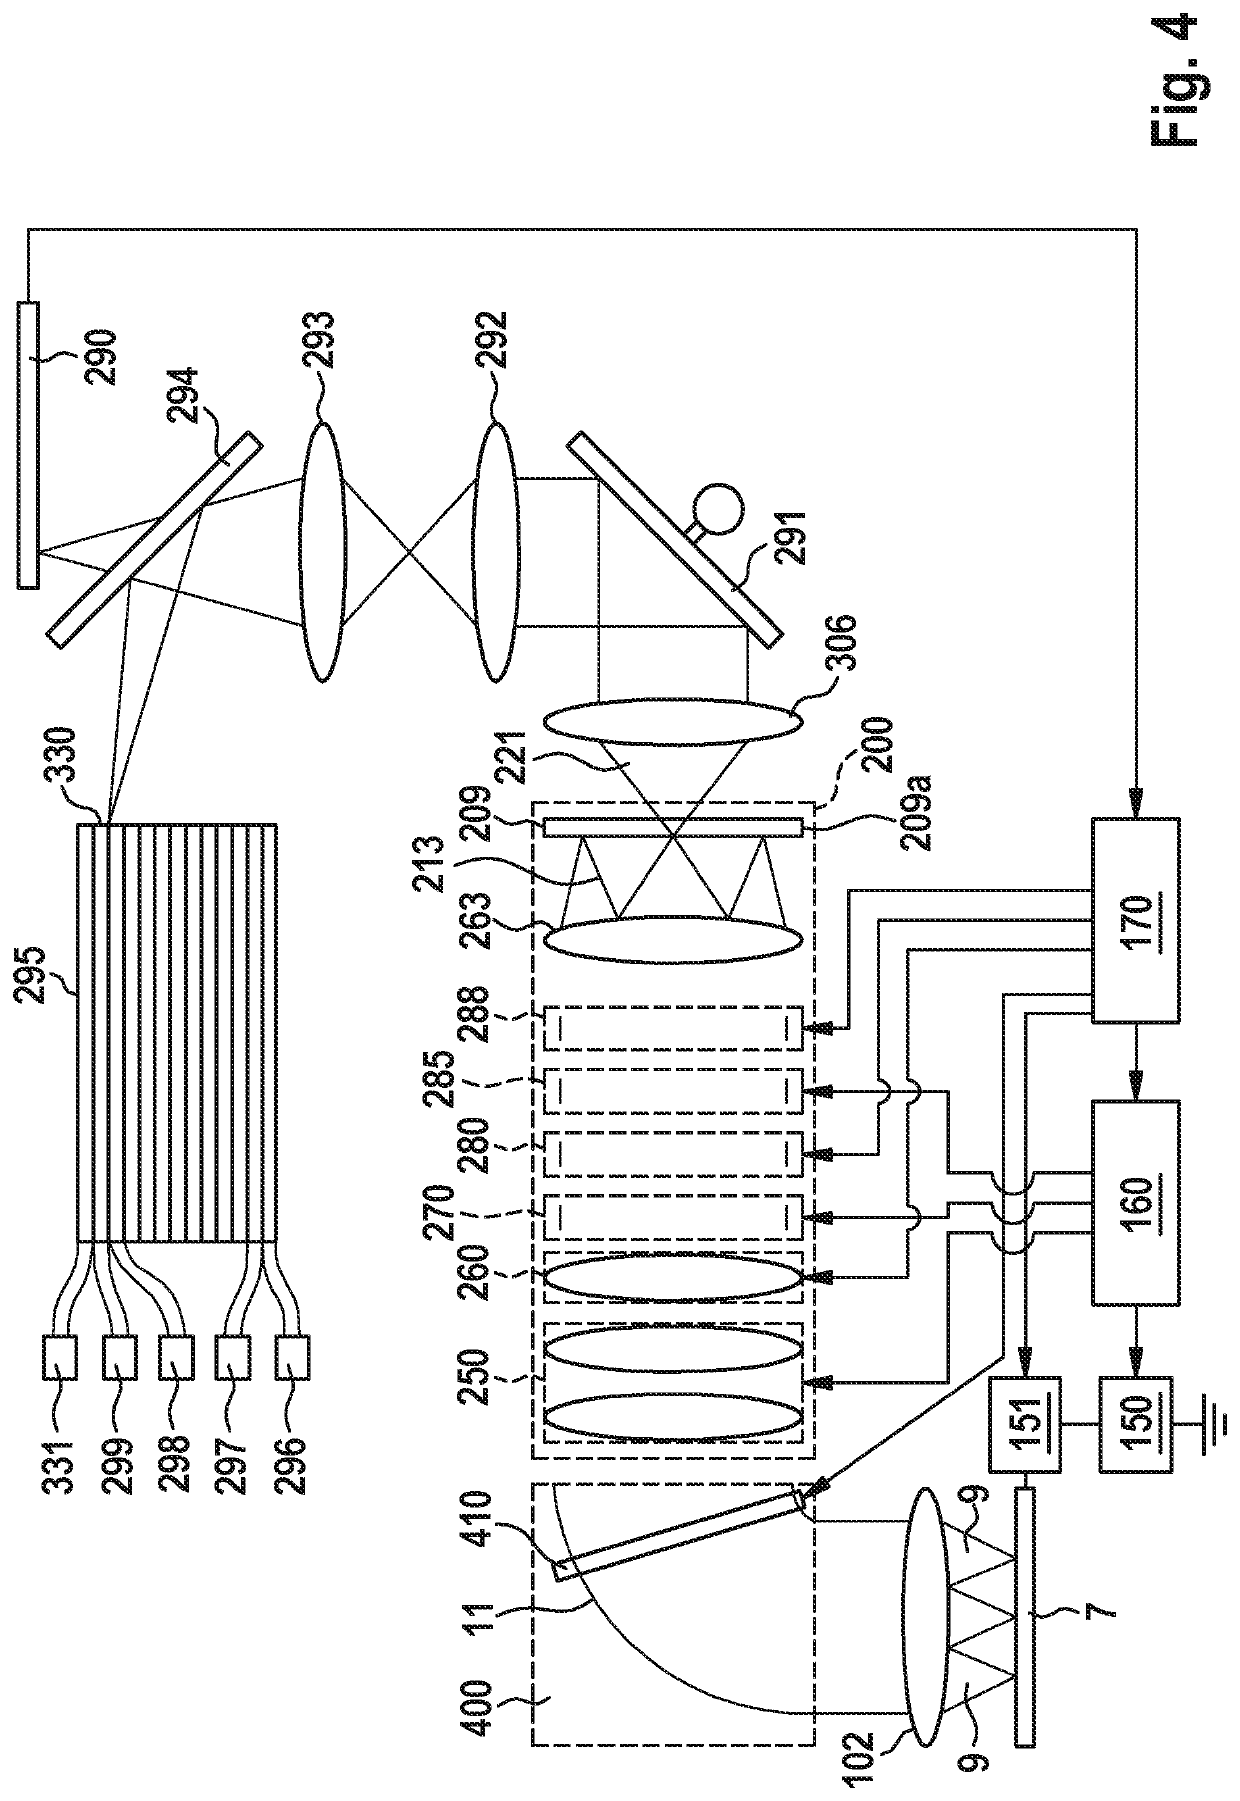 Charged particle beam system and method